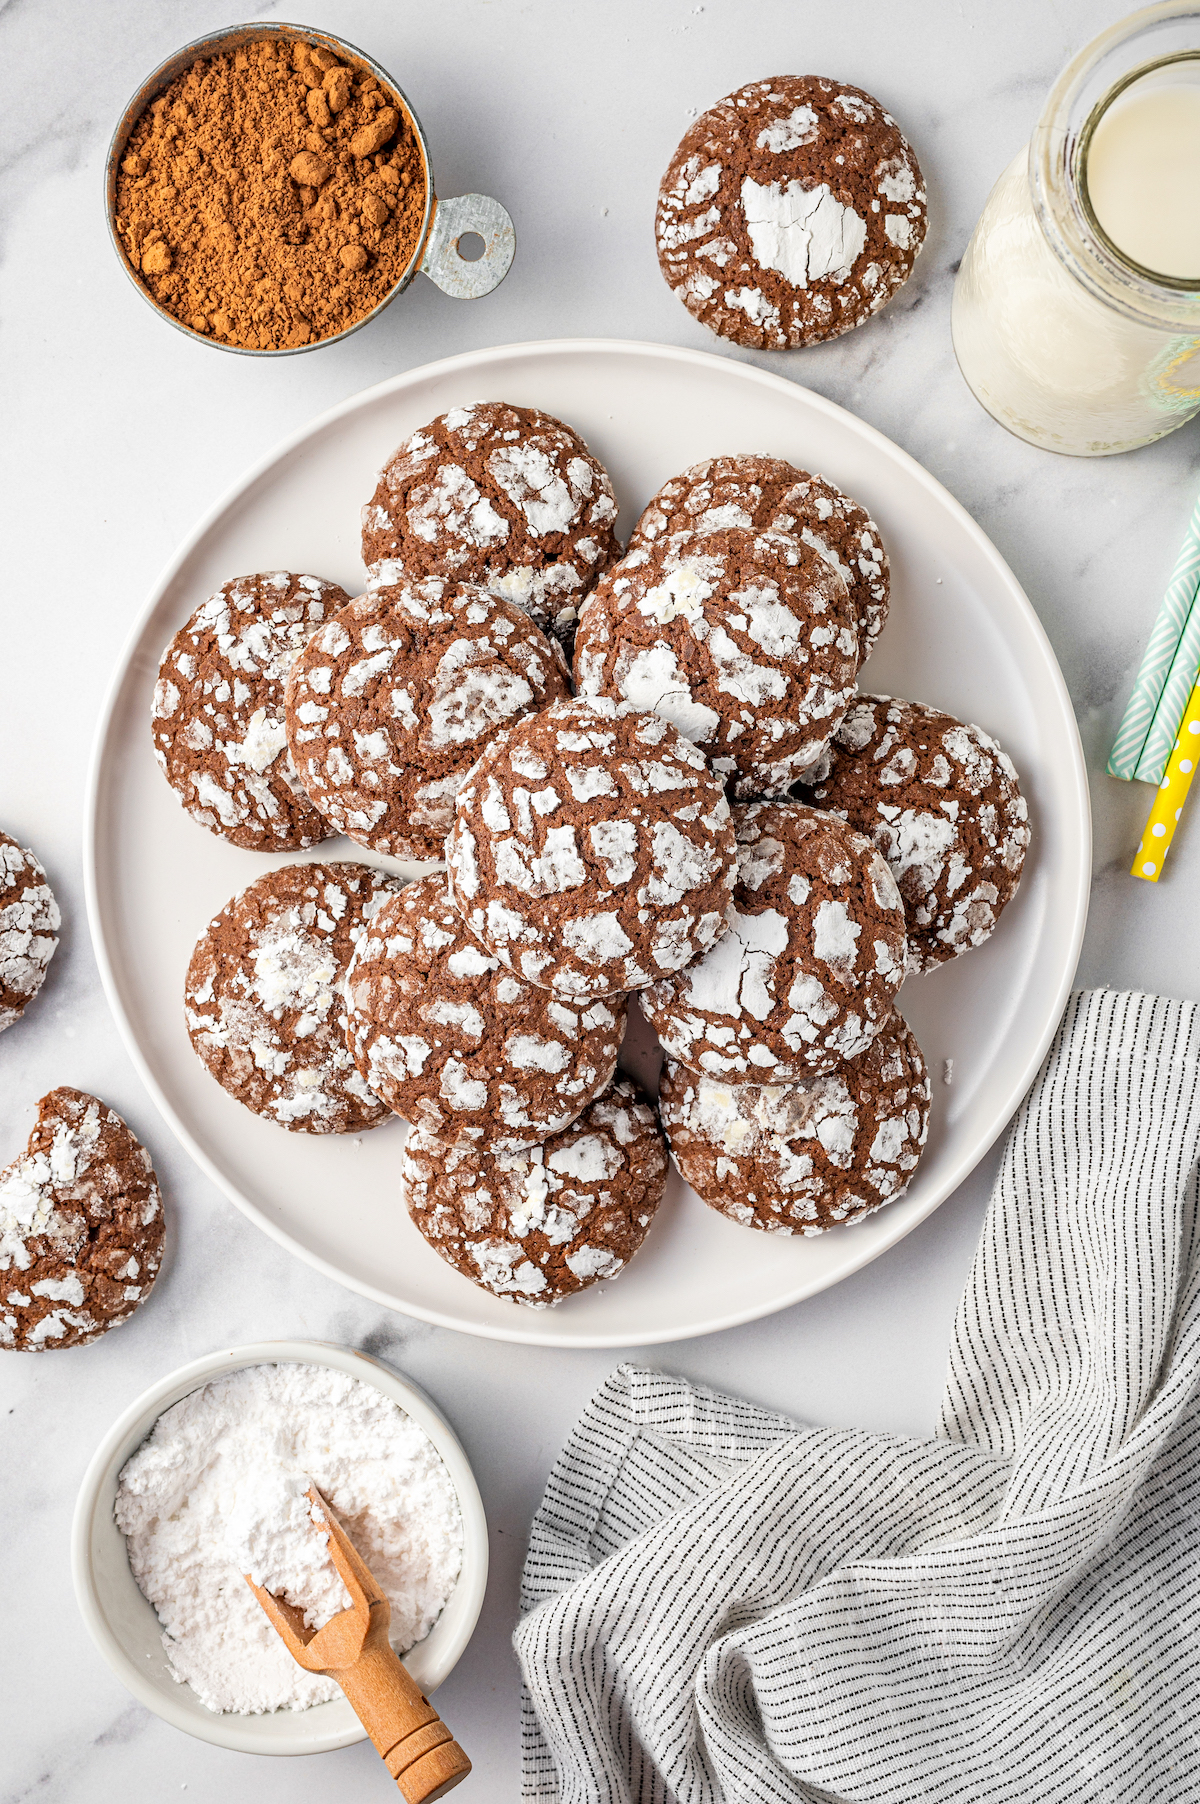 A platter of homemade chocolate crinkle cookies coated in powdered sugar on a serving plate with a glass of milk.